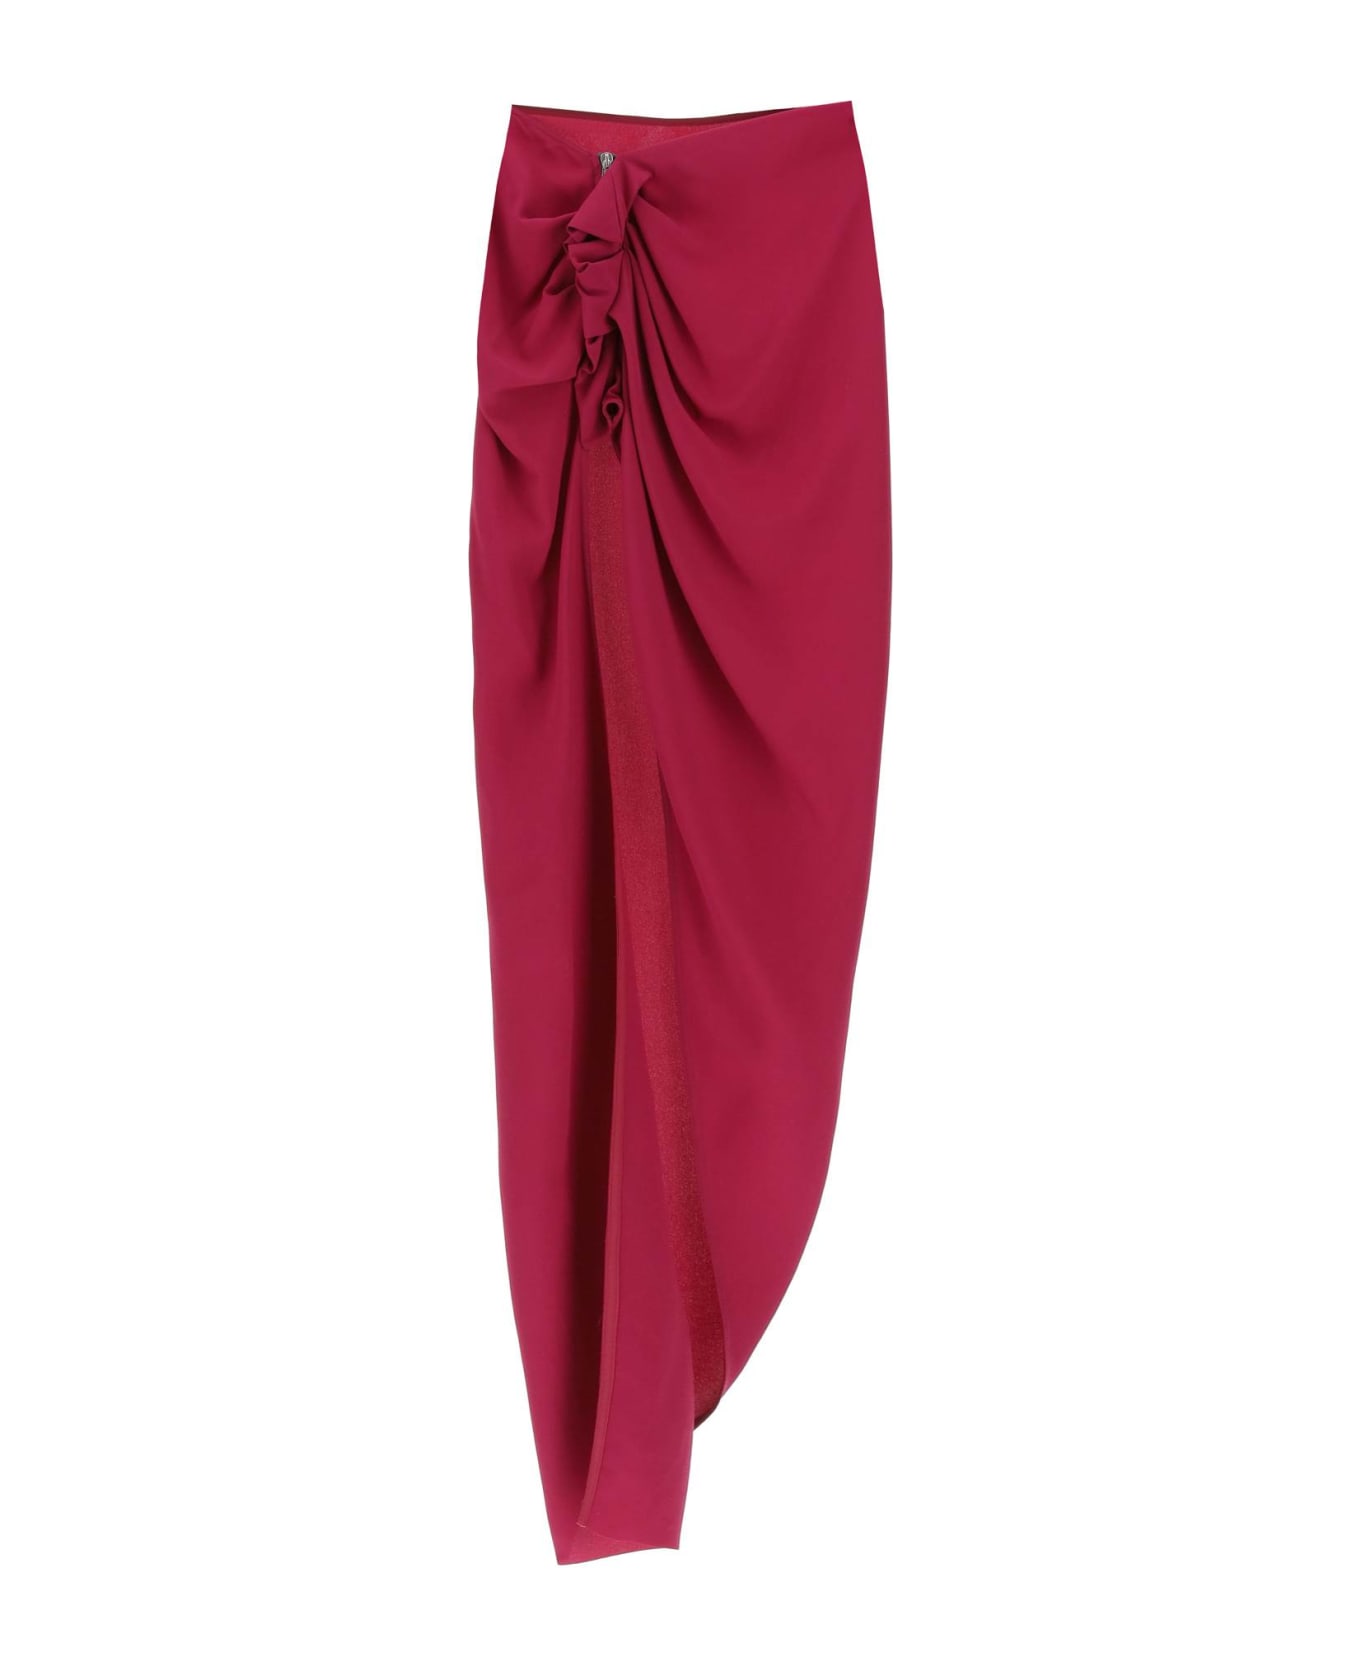 Rick Owens Draped Skirt With Slit And Train - FUXIA (Purple)